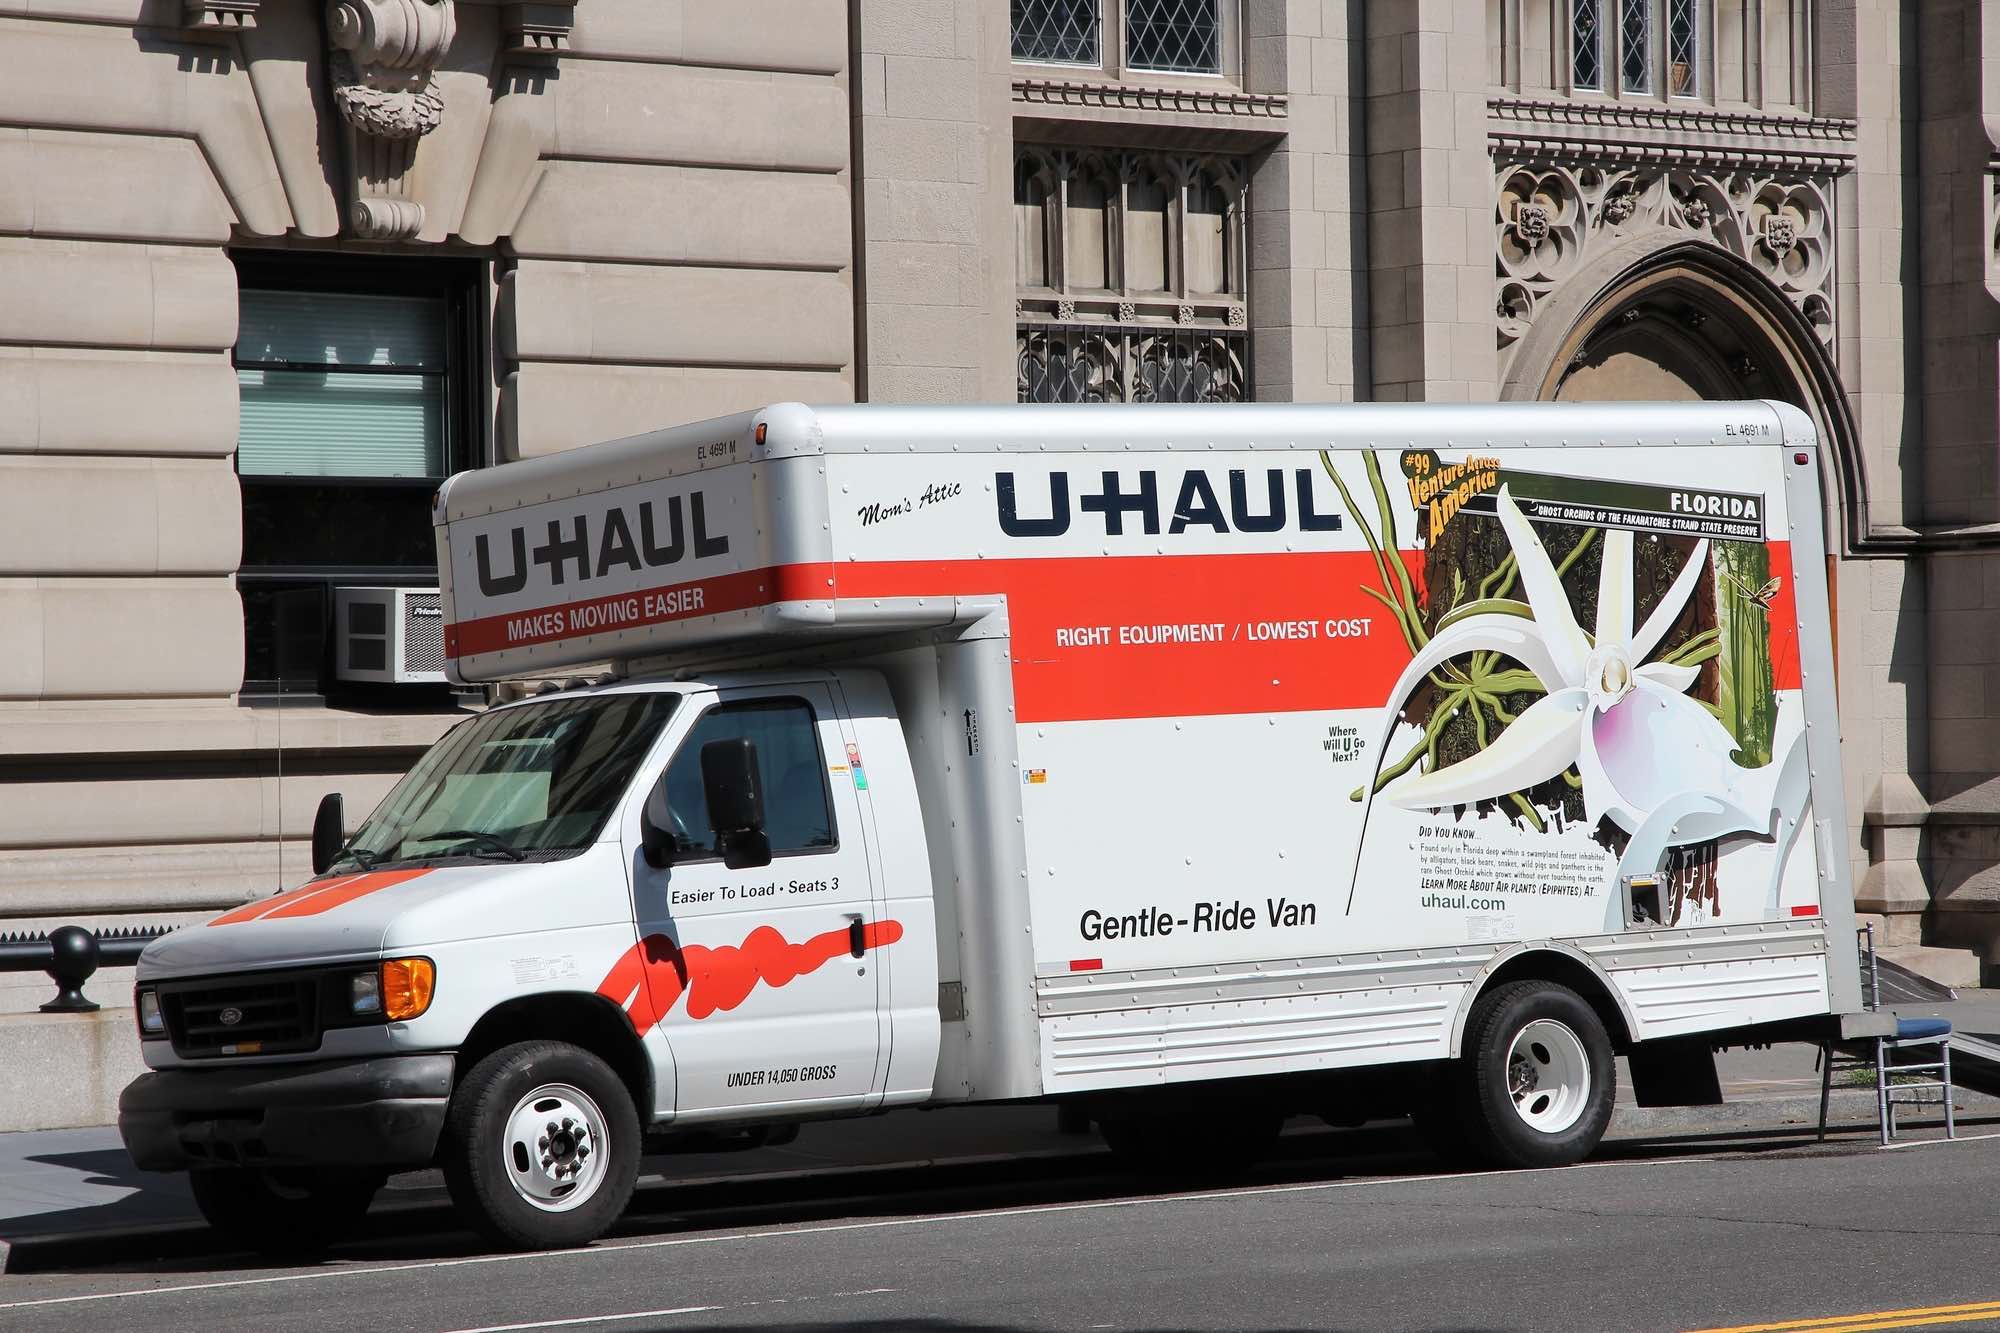 U-Haul truck rented for price not advertised